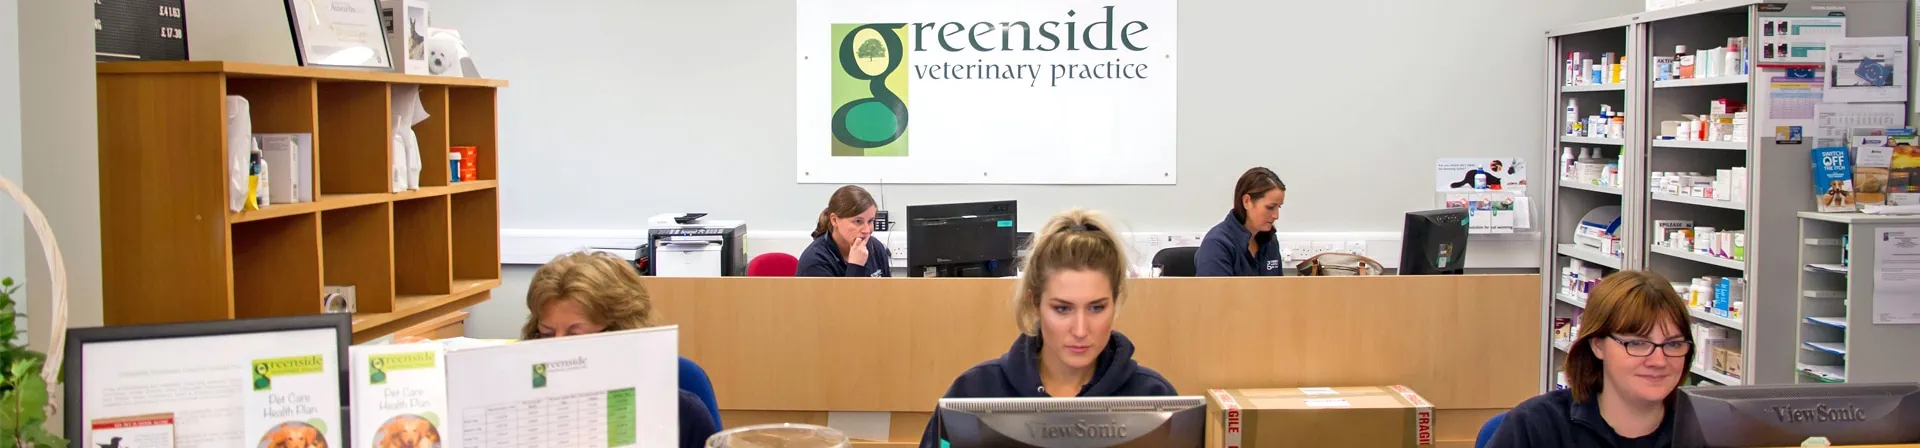 Useful Information from Greenside Vets in St Boswells and Jedburgh